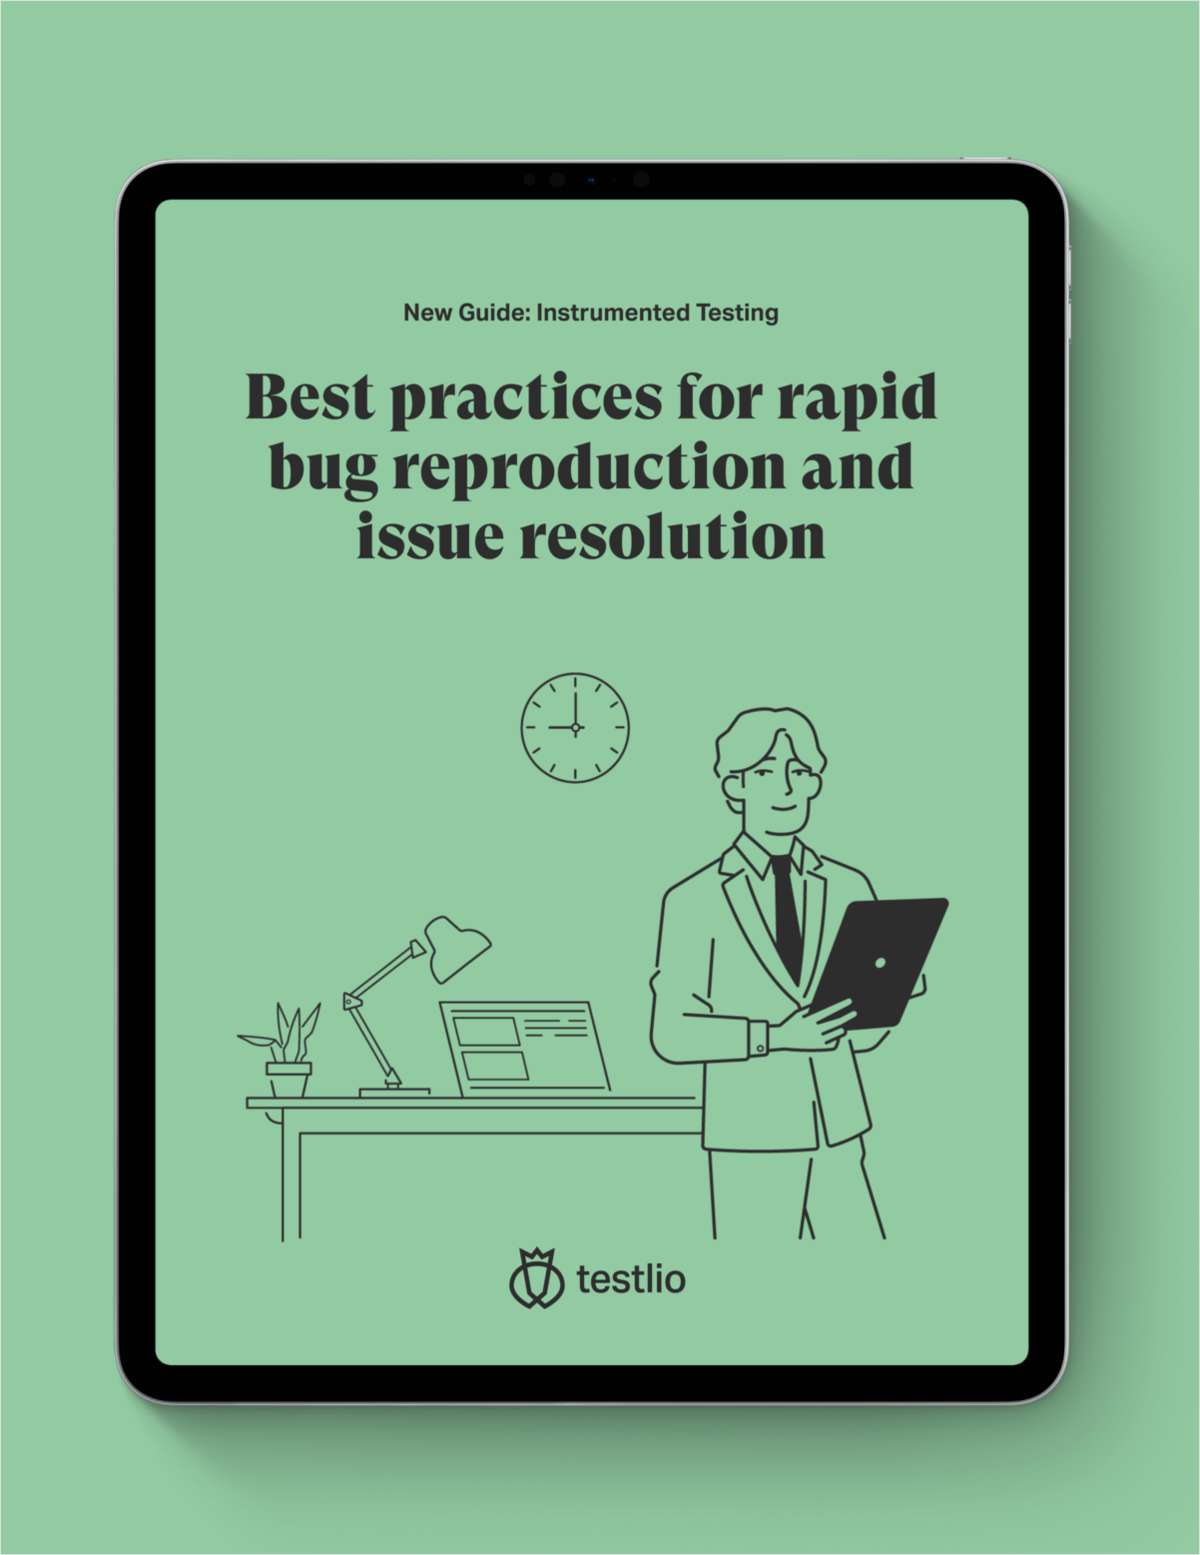 Instrumented Testing: Best Practices for Rapid Bug Reproduction and Issue Resolution